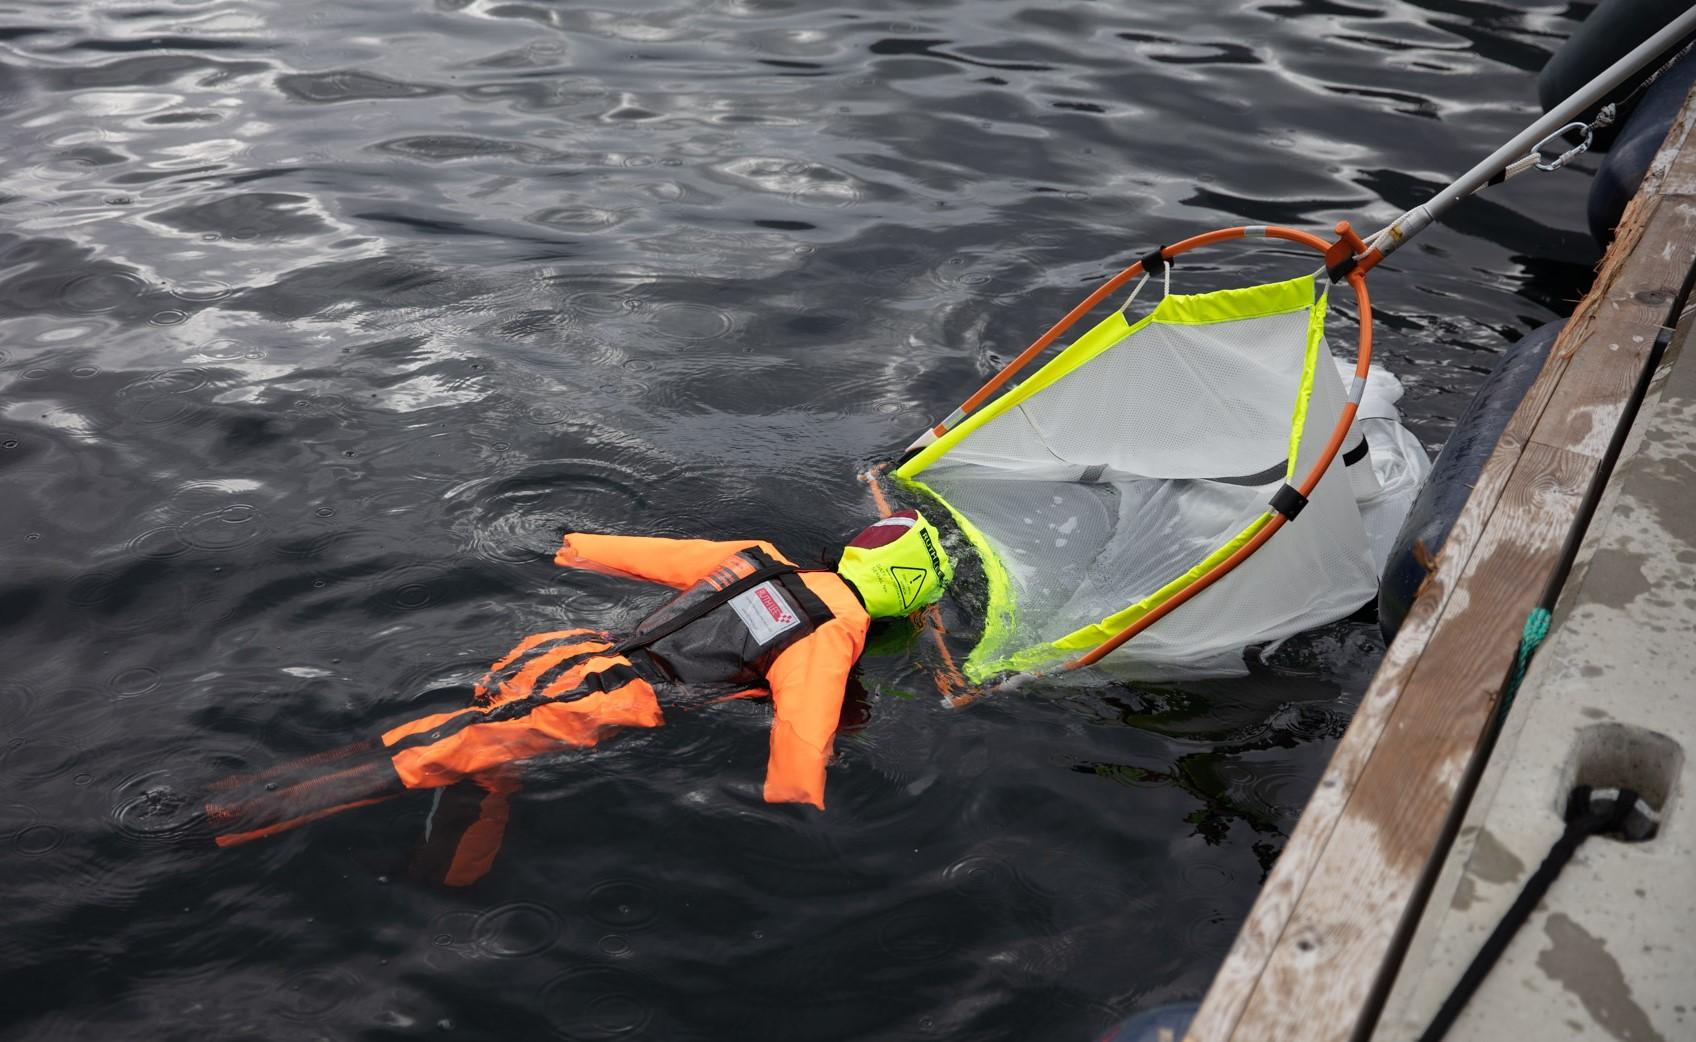 Orange Man Overboard Manikin guided into SB Rescue Sling net near the side of the rescuing vessel.